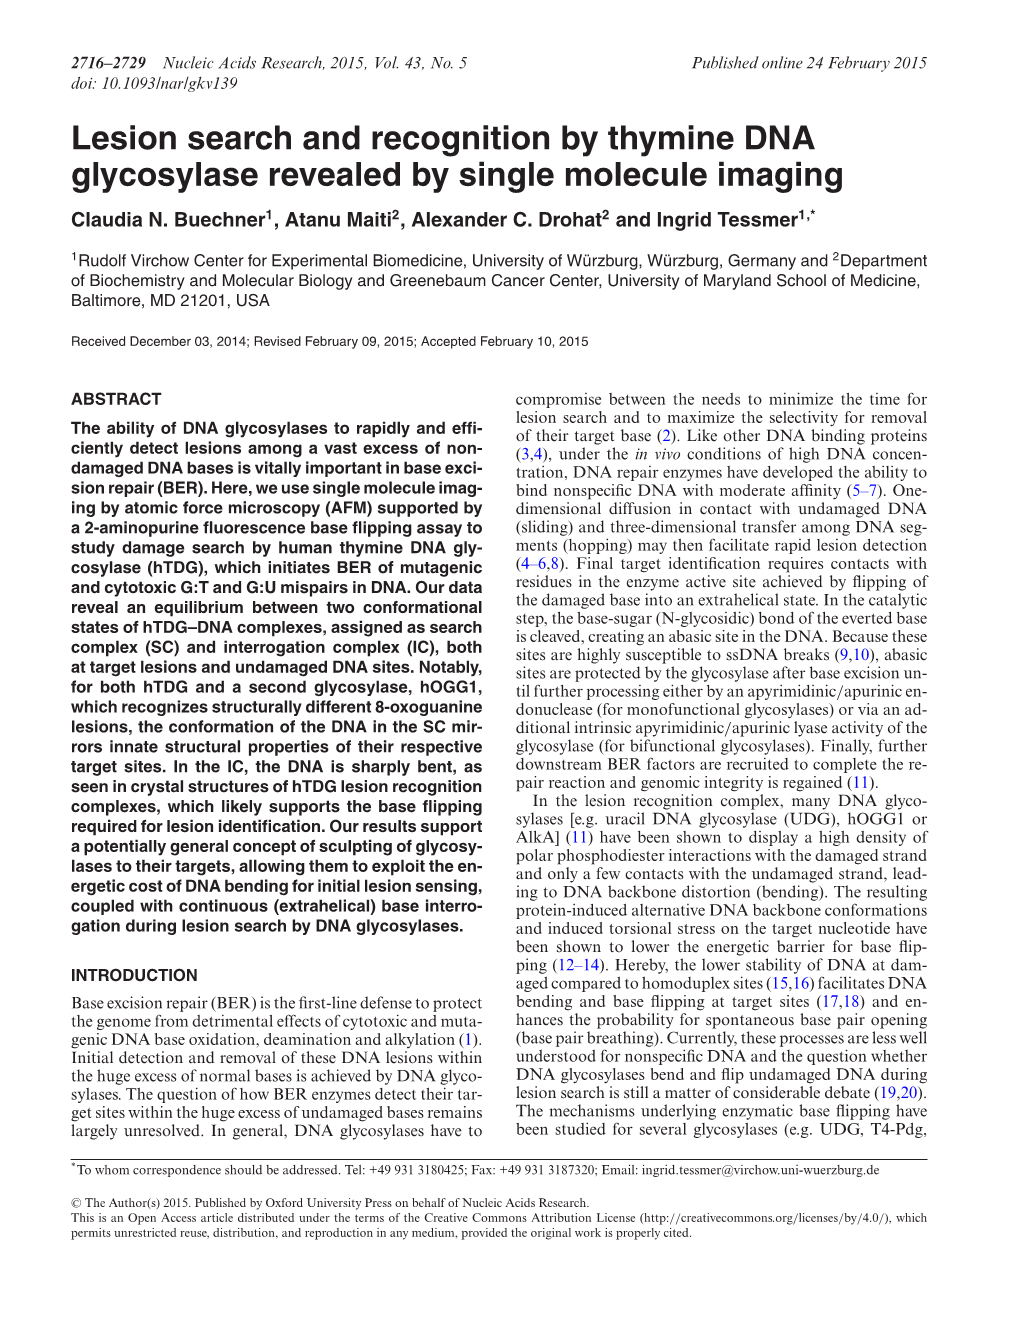 Lesion Search and Recognition by Thymine DNA Glycosylase Revealed by Single Molecule Imaging Claudia N